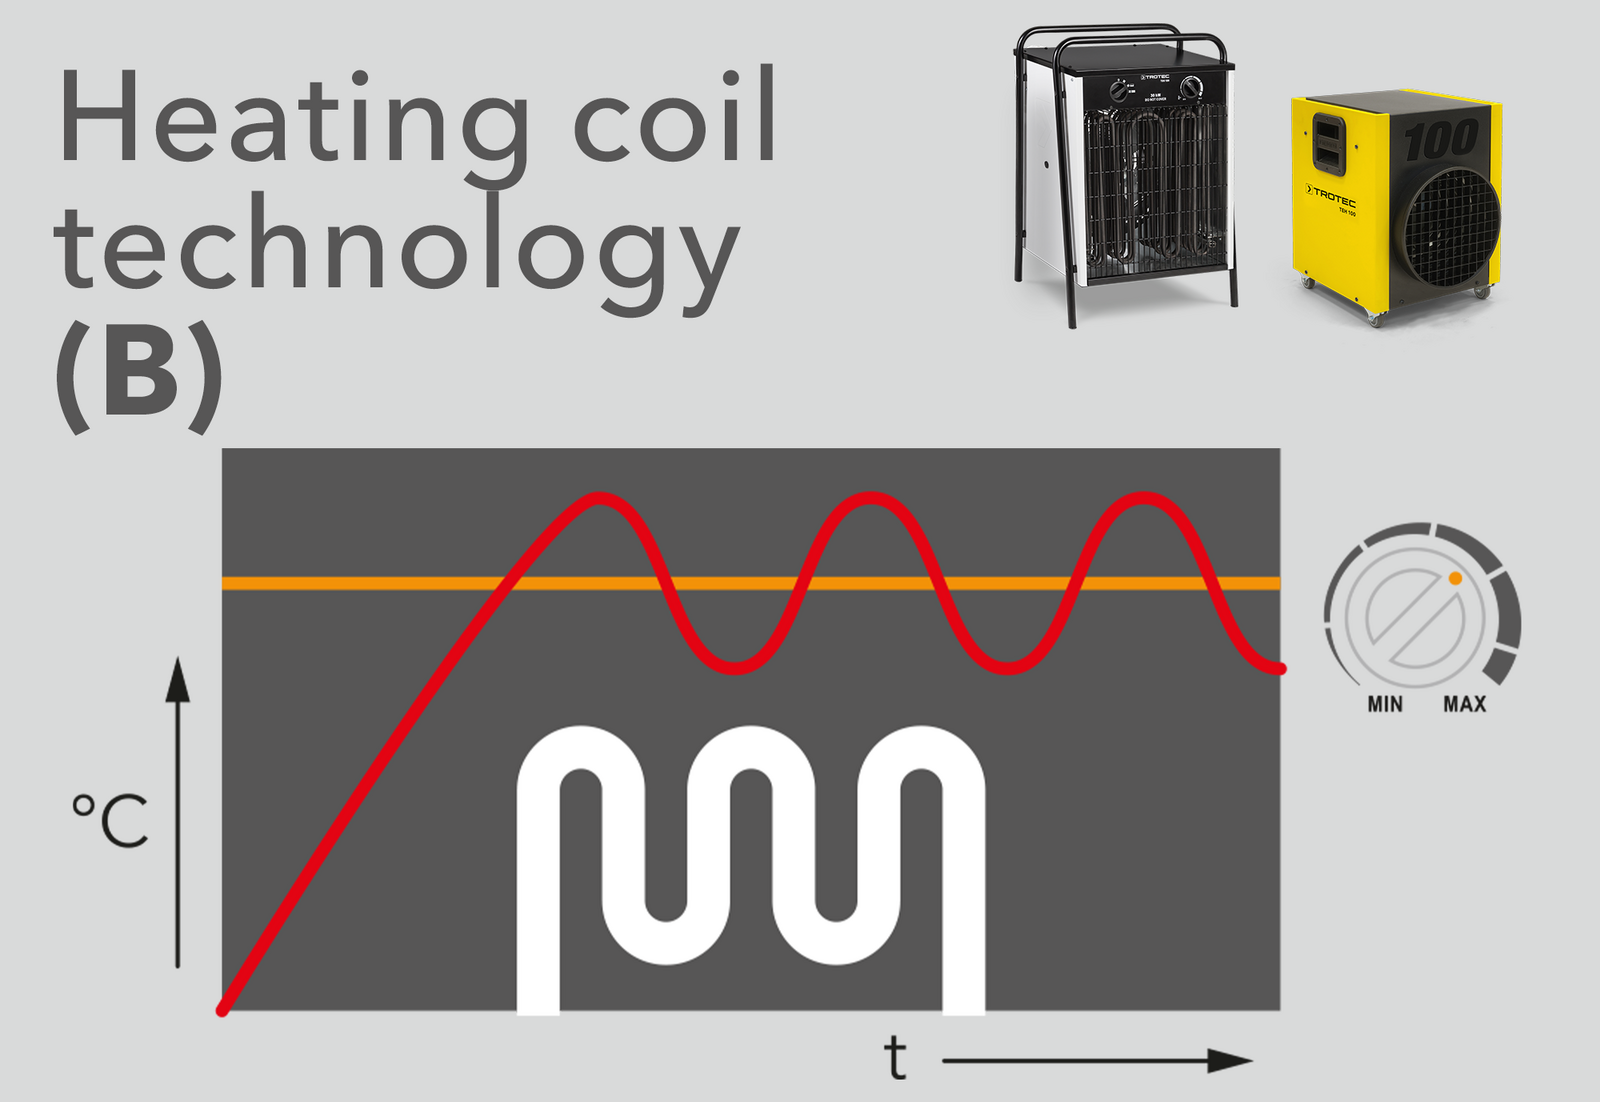 Heating coil technology